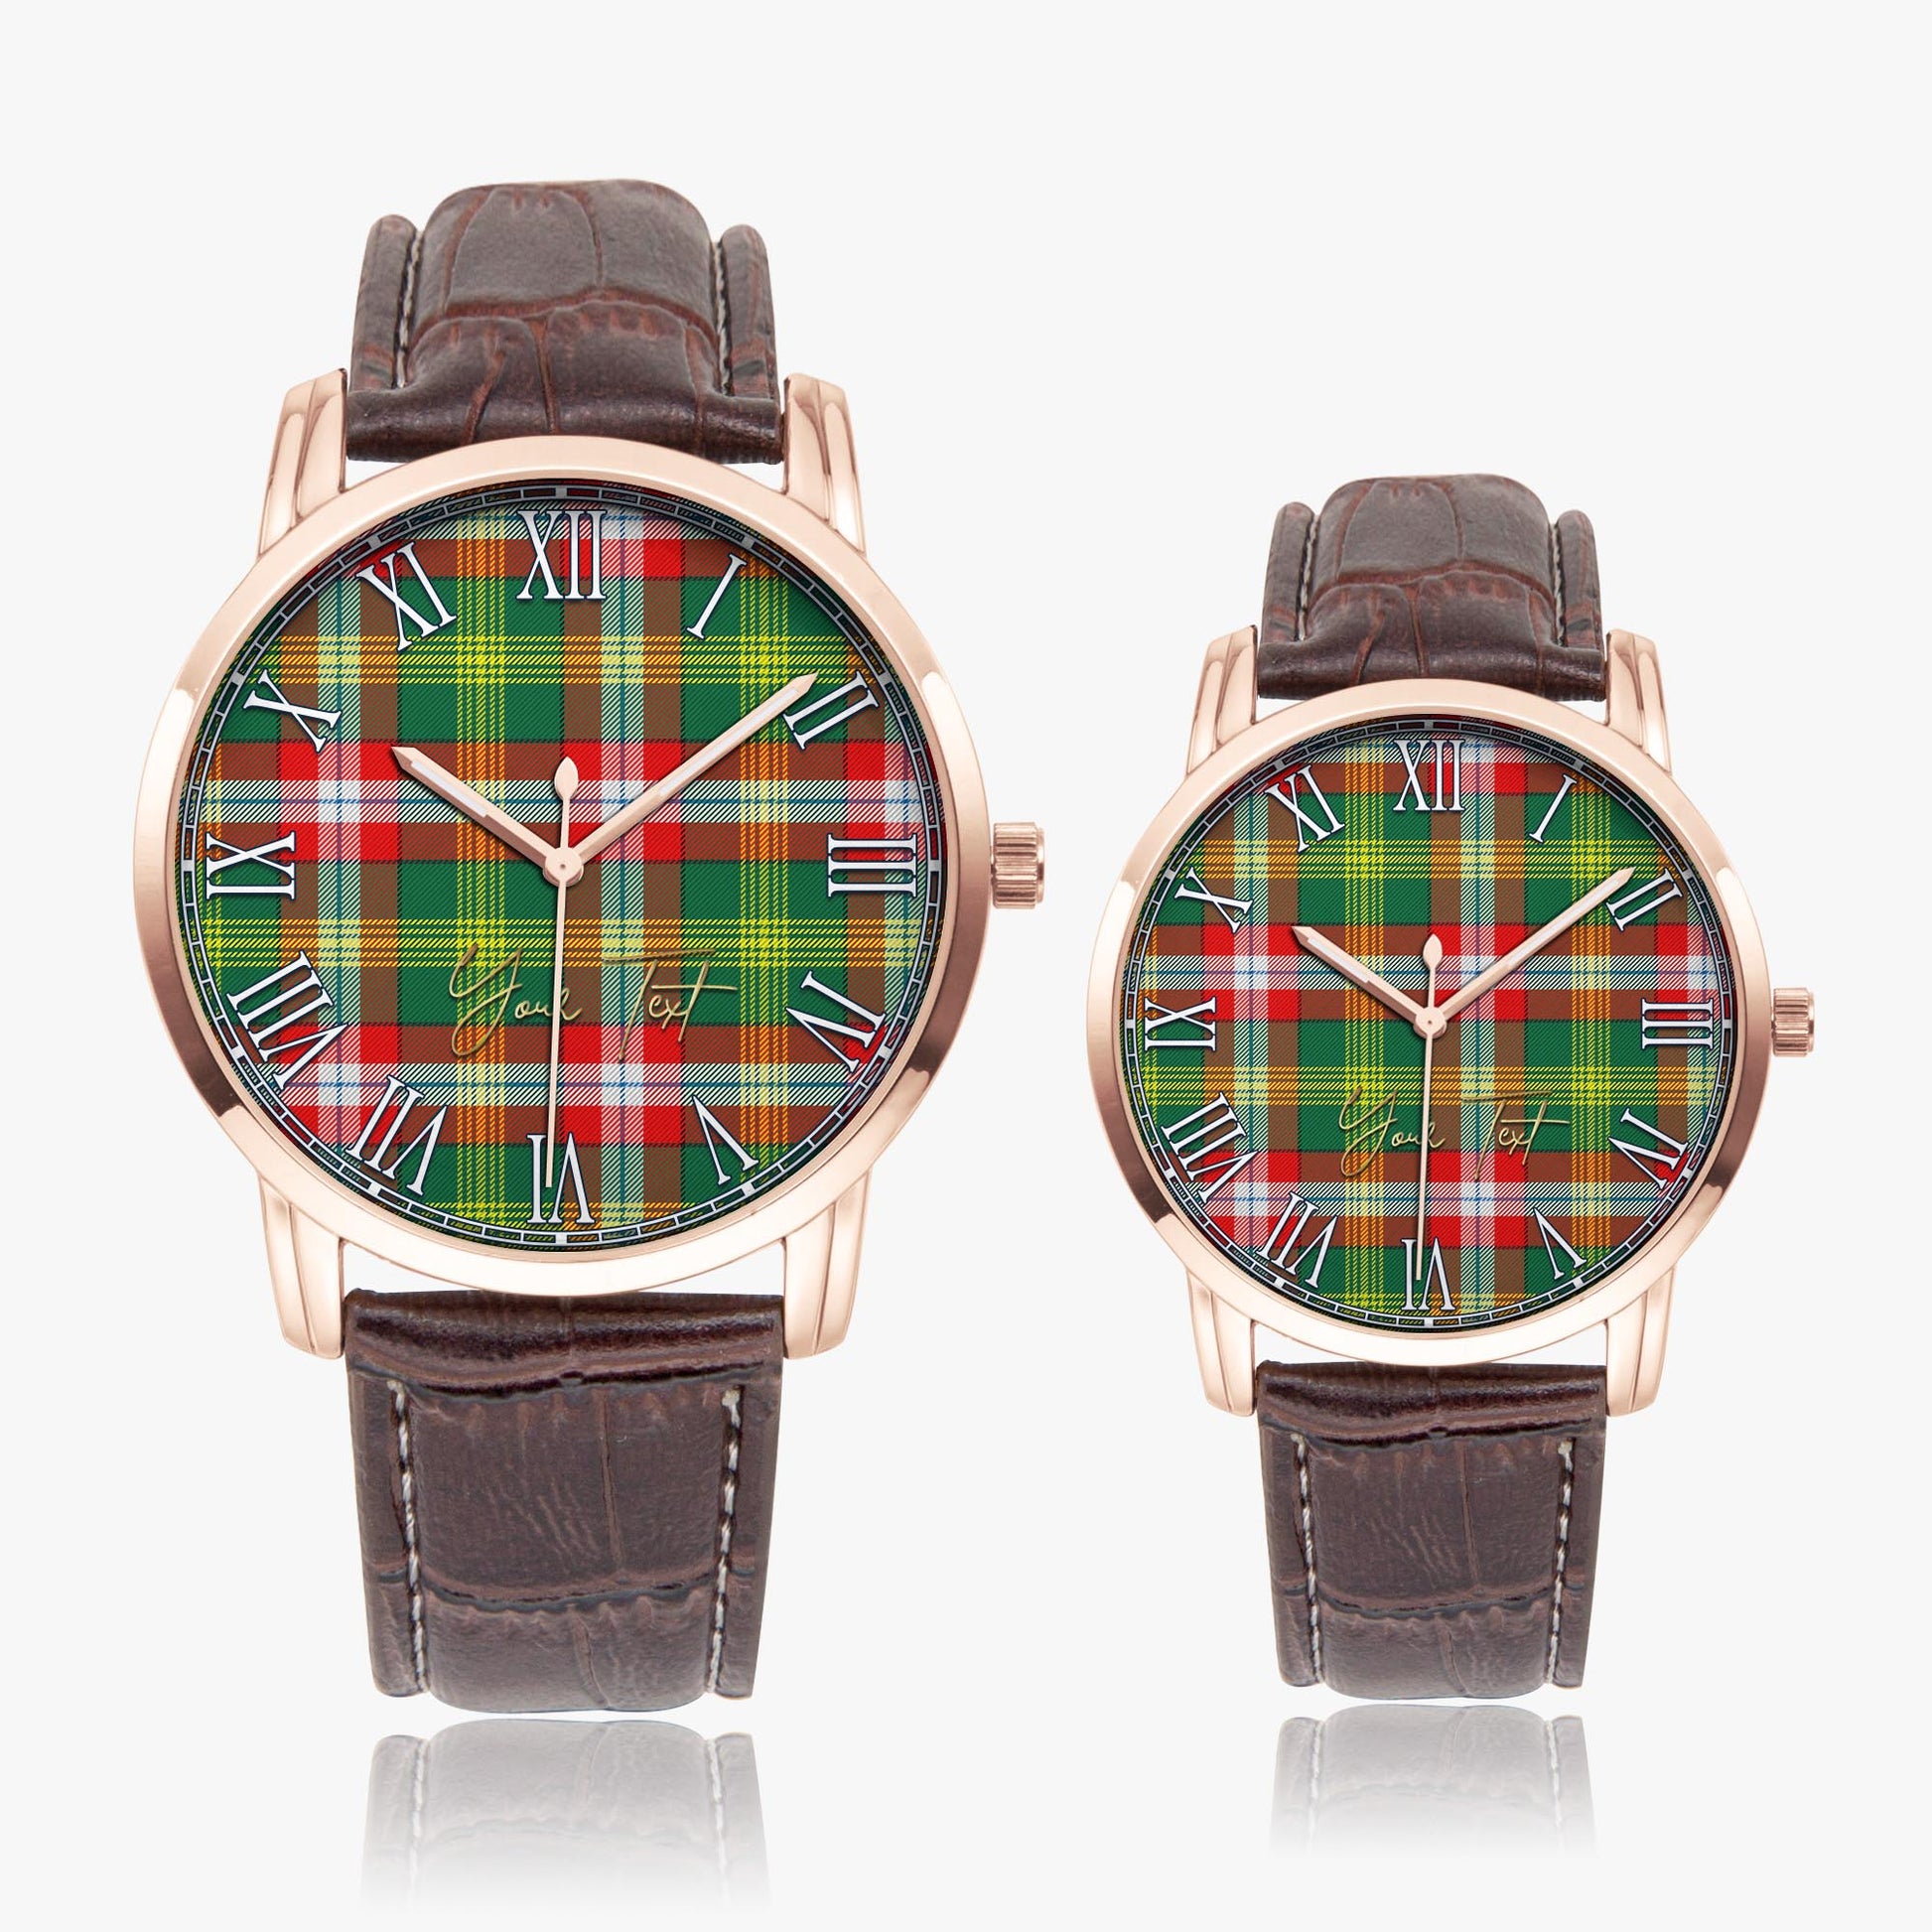 Northwest Territories Canada Tartan Personalized Your Text Leather Trap Quartz Watch Wide Type Rose Gold Case With Brown Leather Strap - Tartanvibesclothing